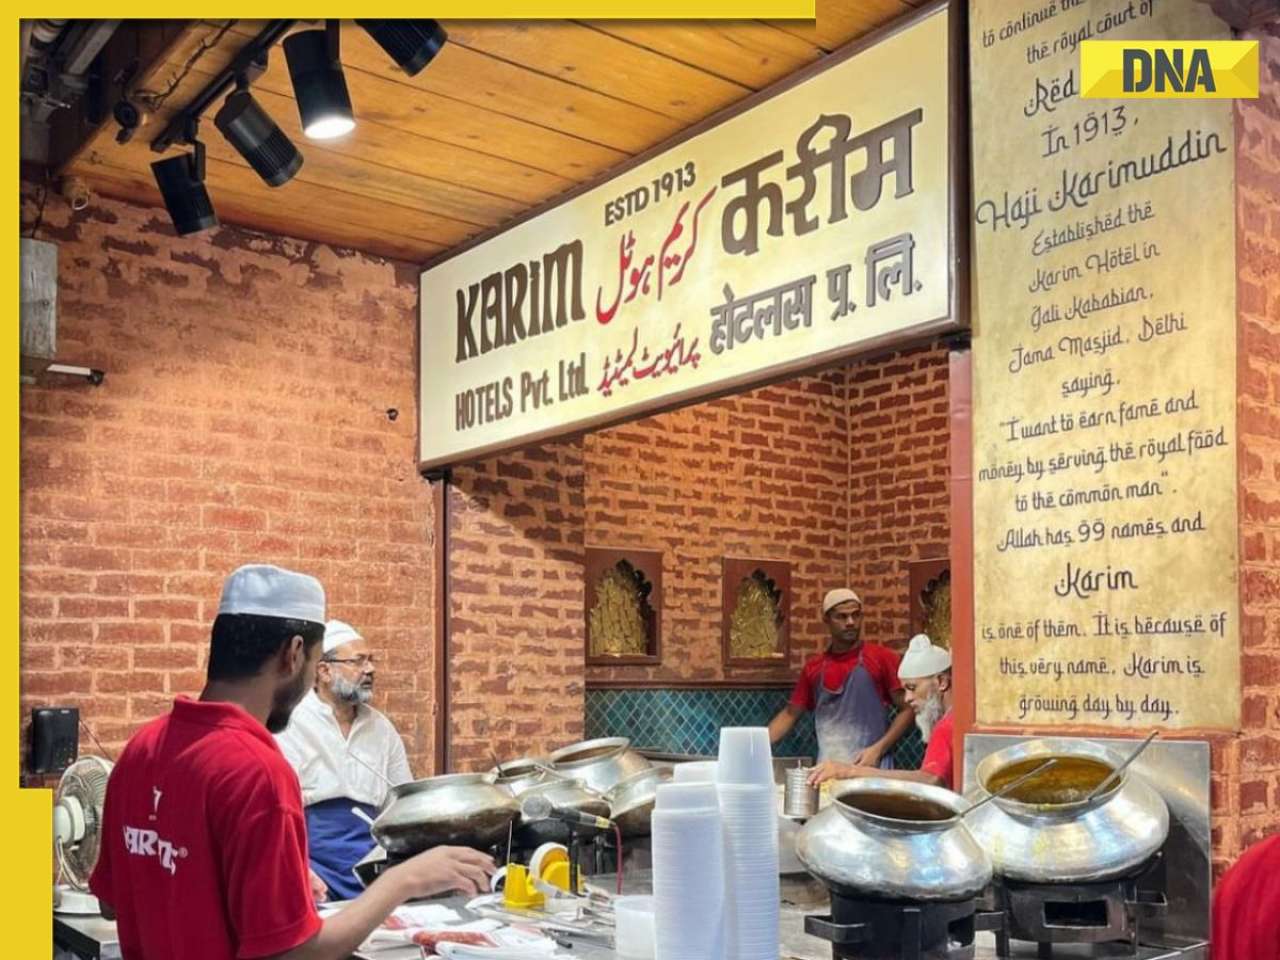 Meet man behind origin of Karim's resturant, who started mughal cuisine business in Delhi, it's current owner is...